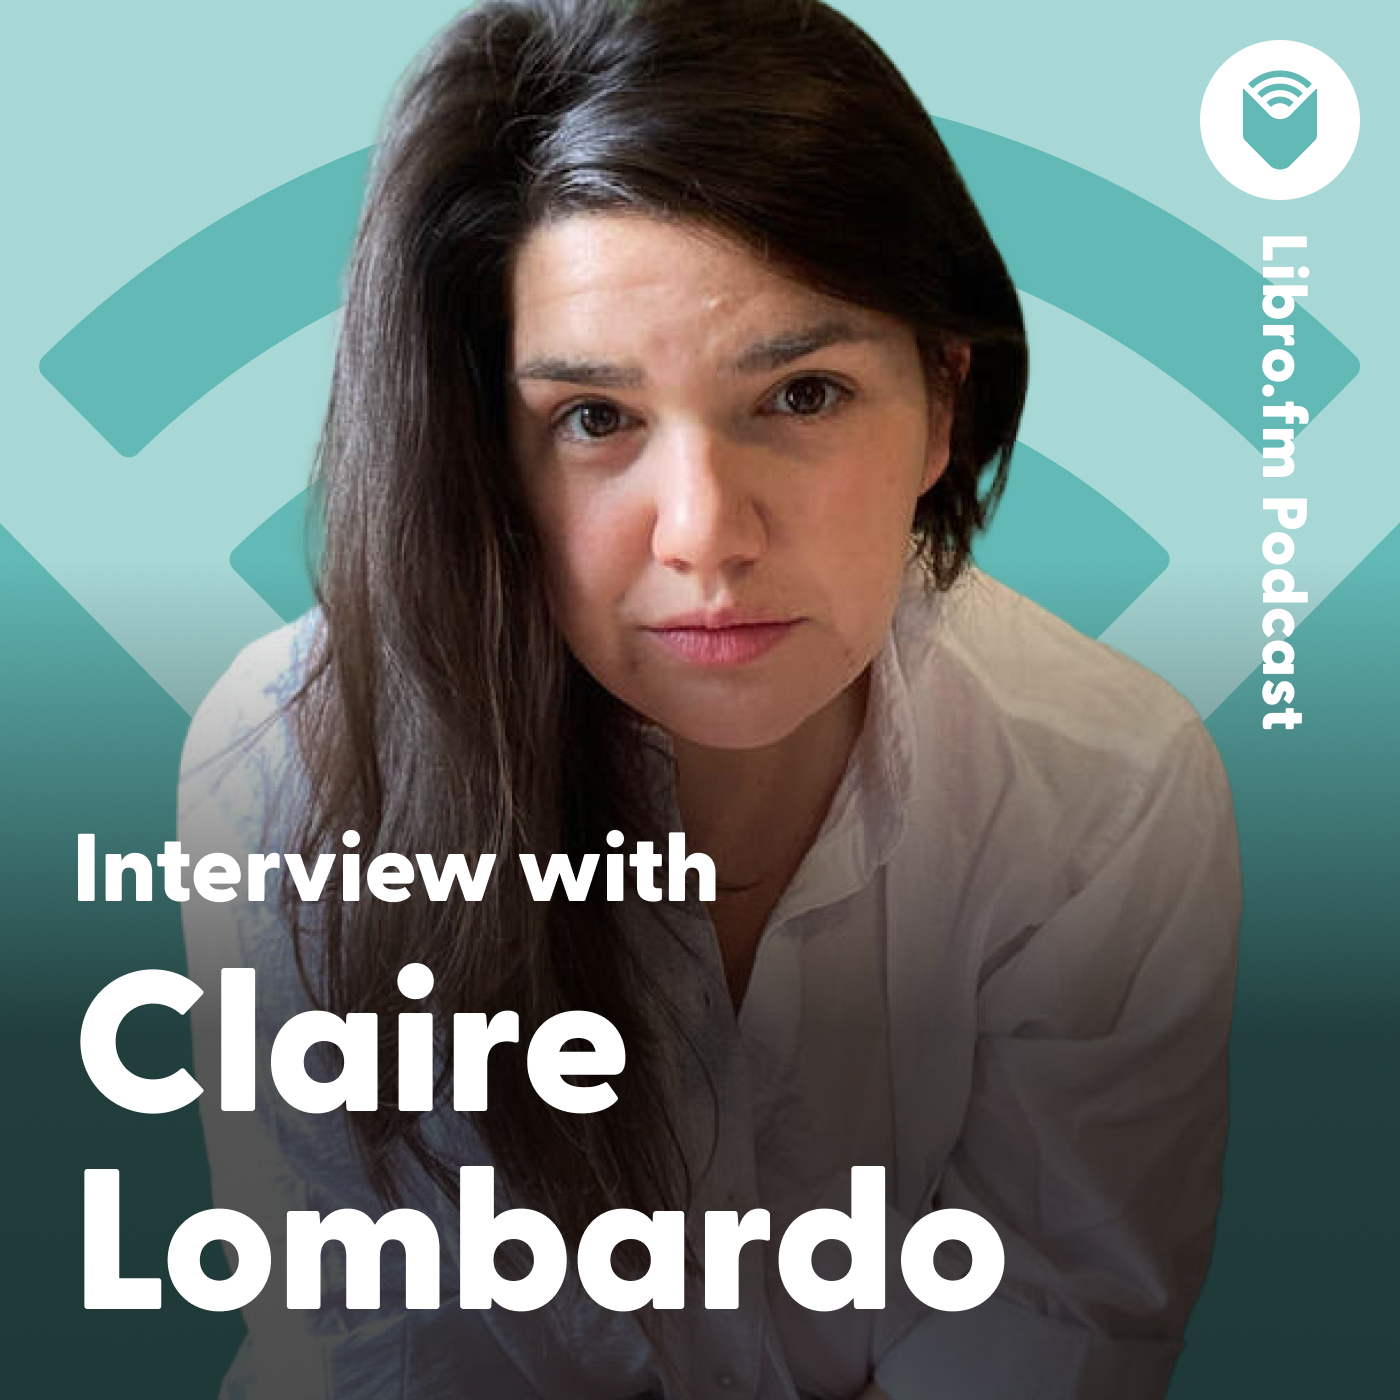 A headshot of Claire Lombardo on a teal background showing the Libro.fm logo. Text reads: “Libro.fm Podcast: Interview with Claire Lombardo."